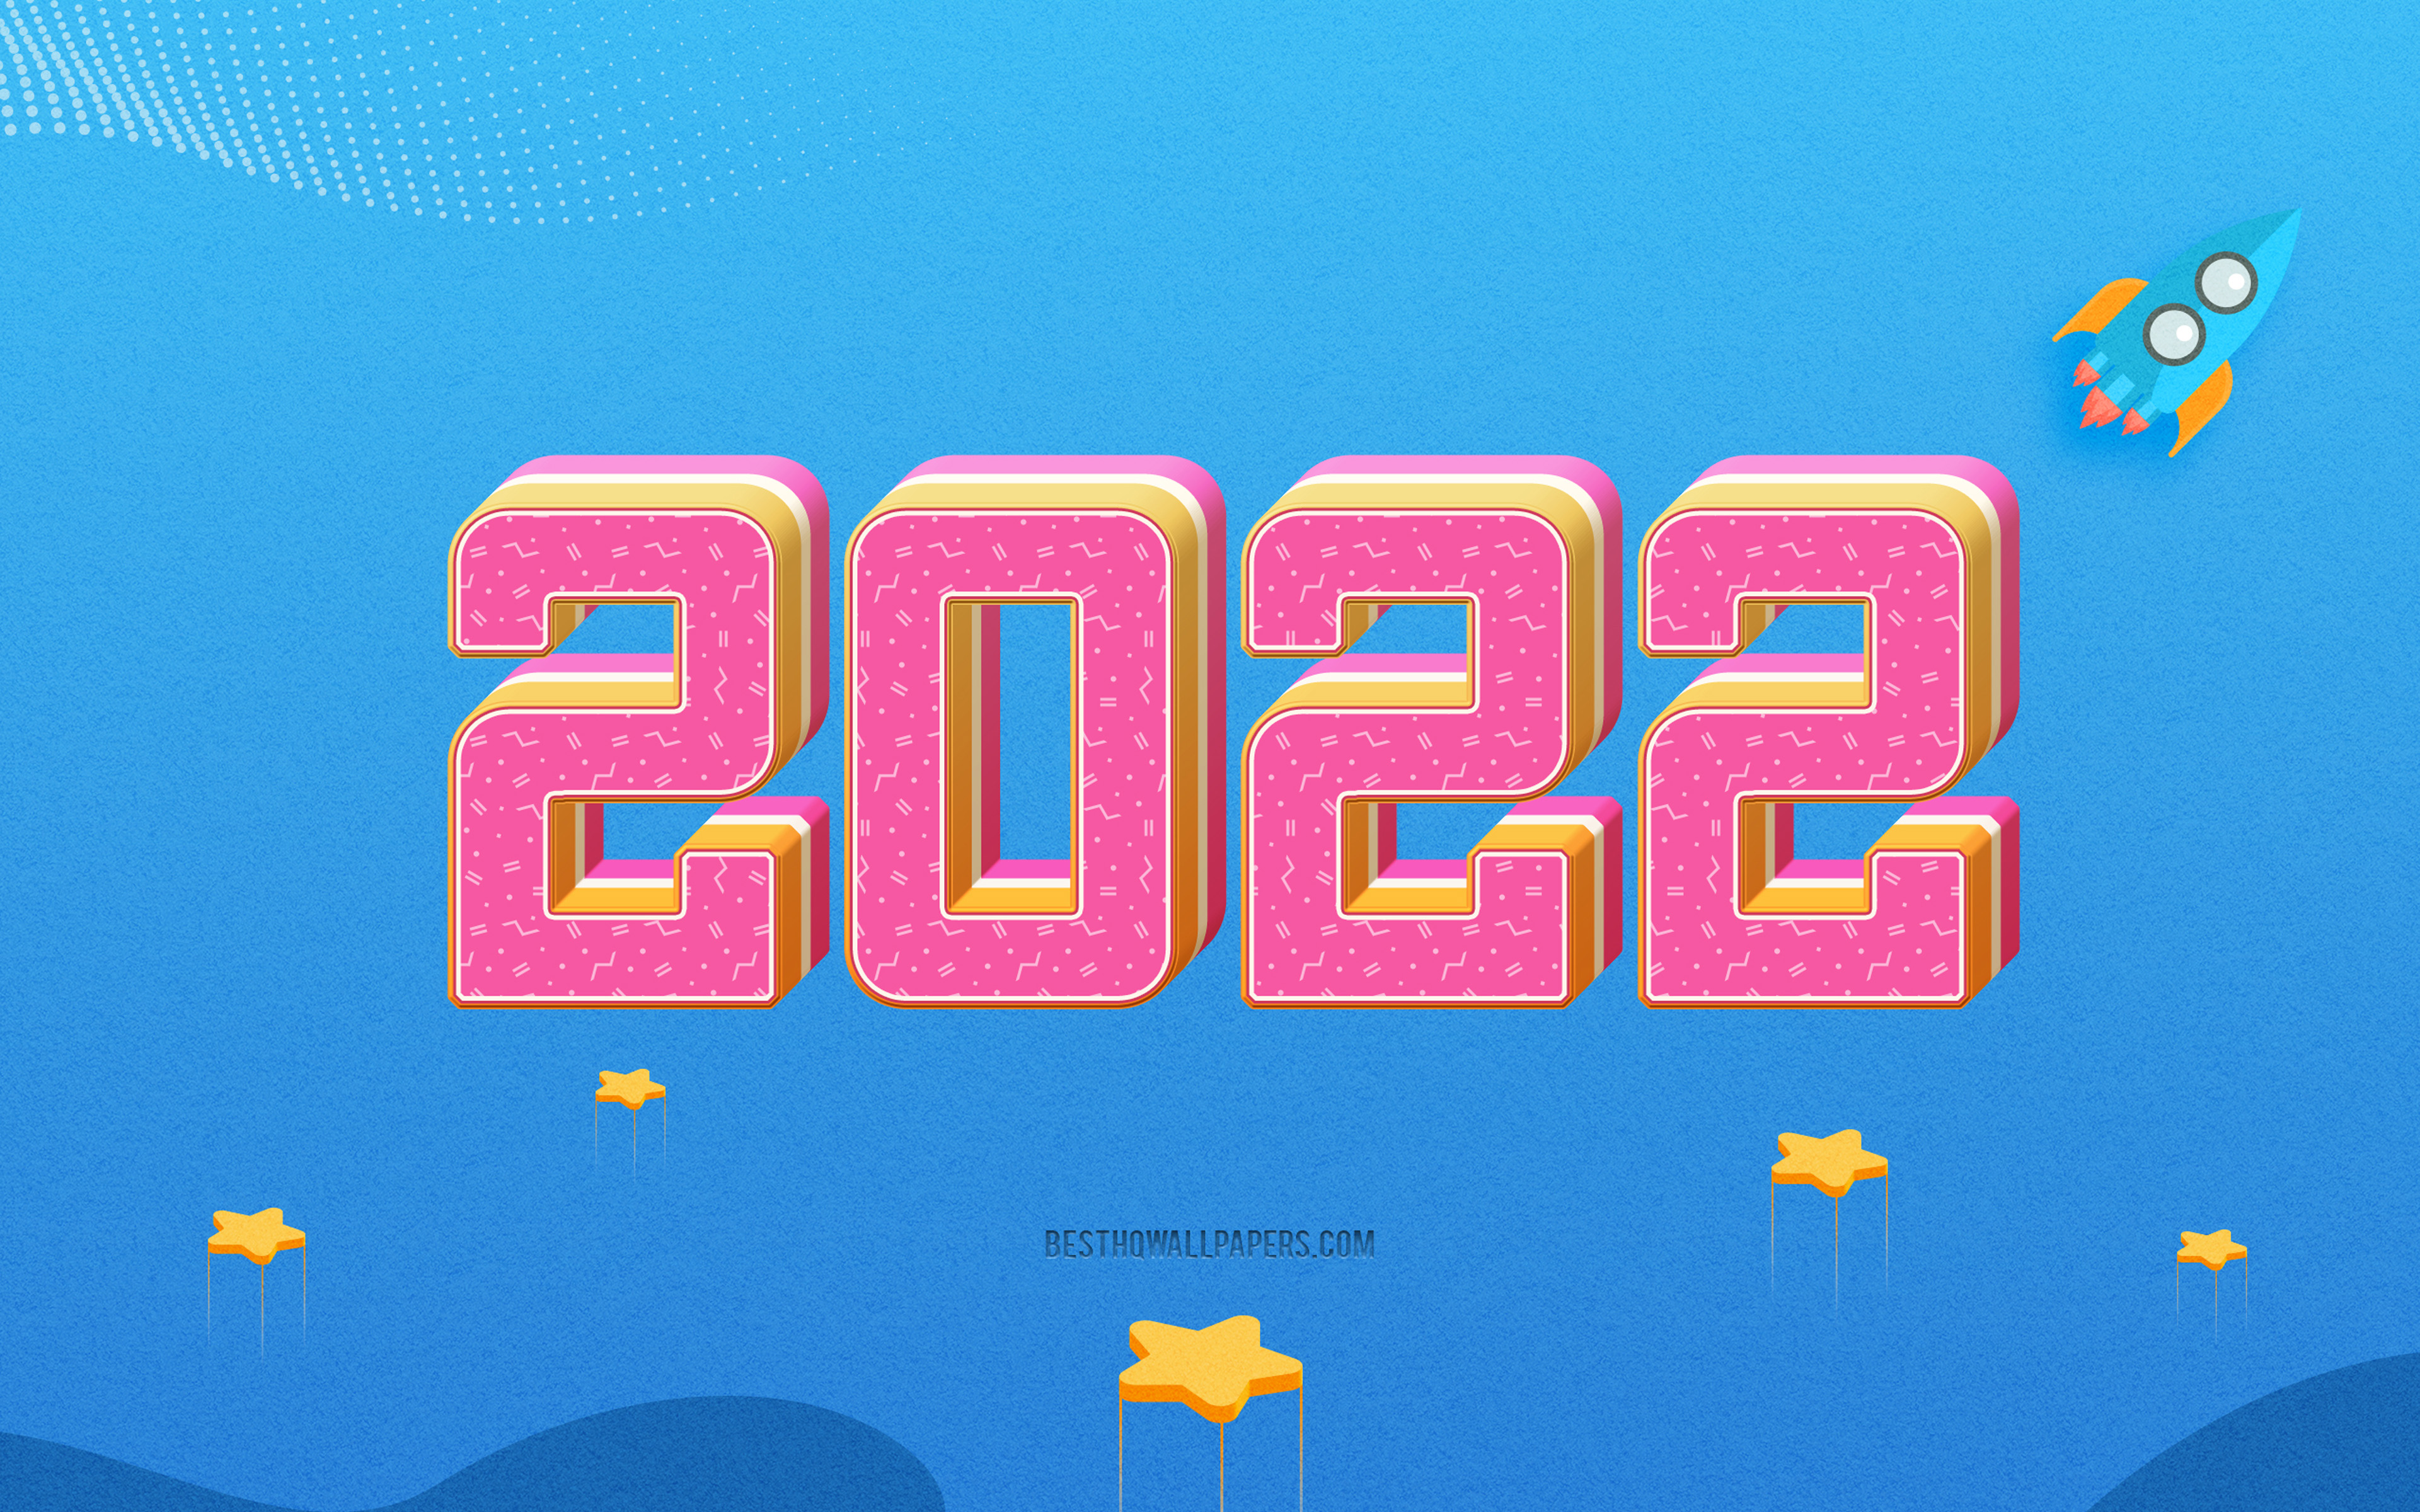 Download wallpaper 2022 New Year, 3D art, Happy New Year isometric art, 2022 isometric background, 2022 Startup, start 2022 concepts, 2022 blue background for desktop with resolution 3840x2400. High Quality HD picture wallpaper